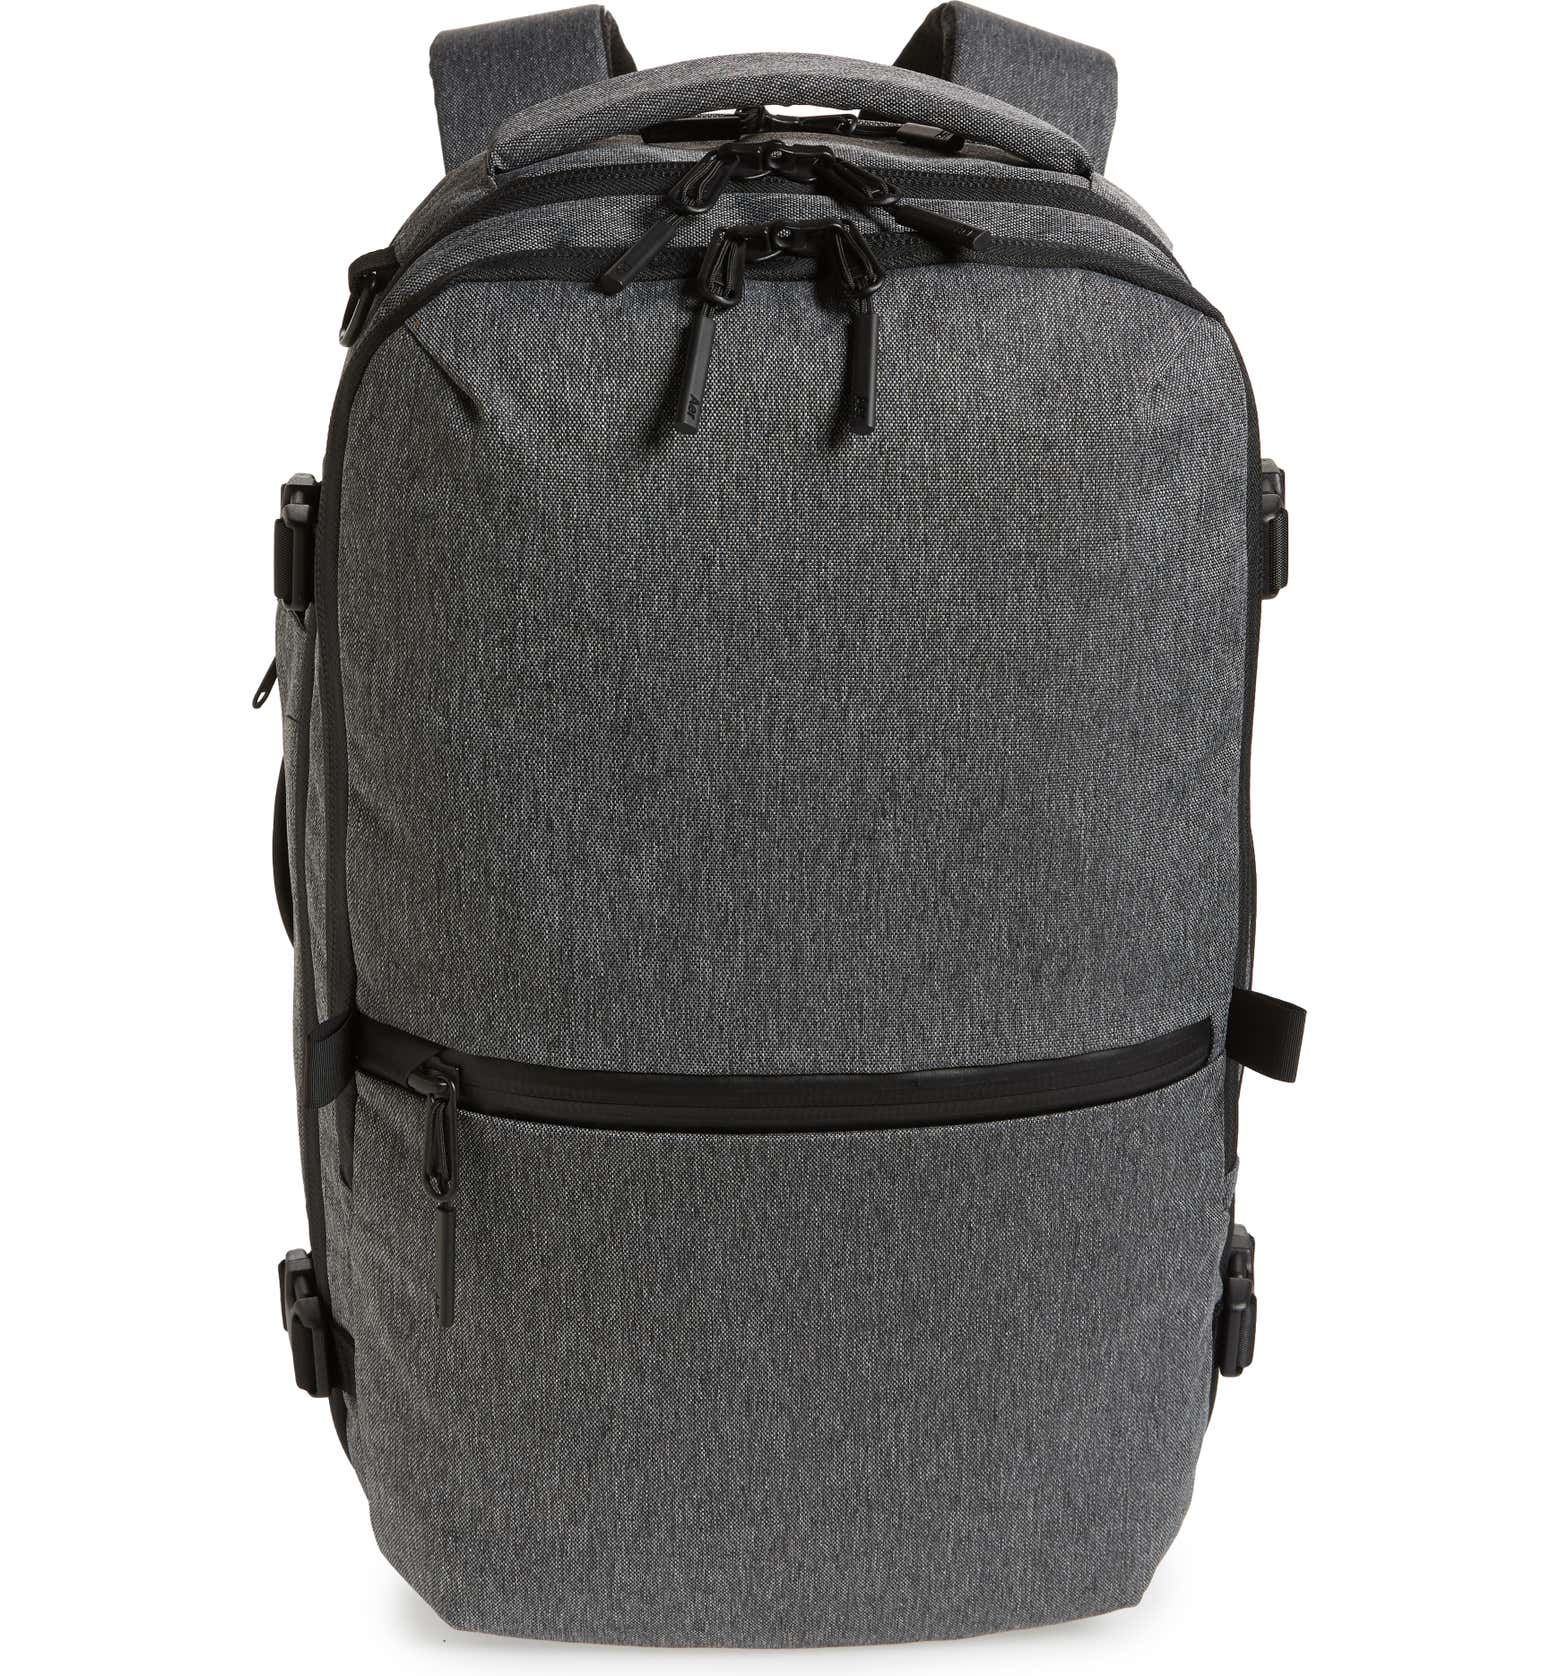 aer travel backpack review